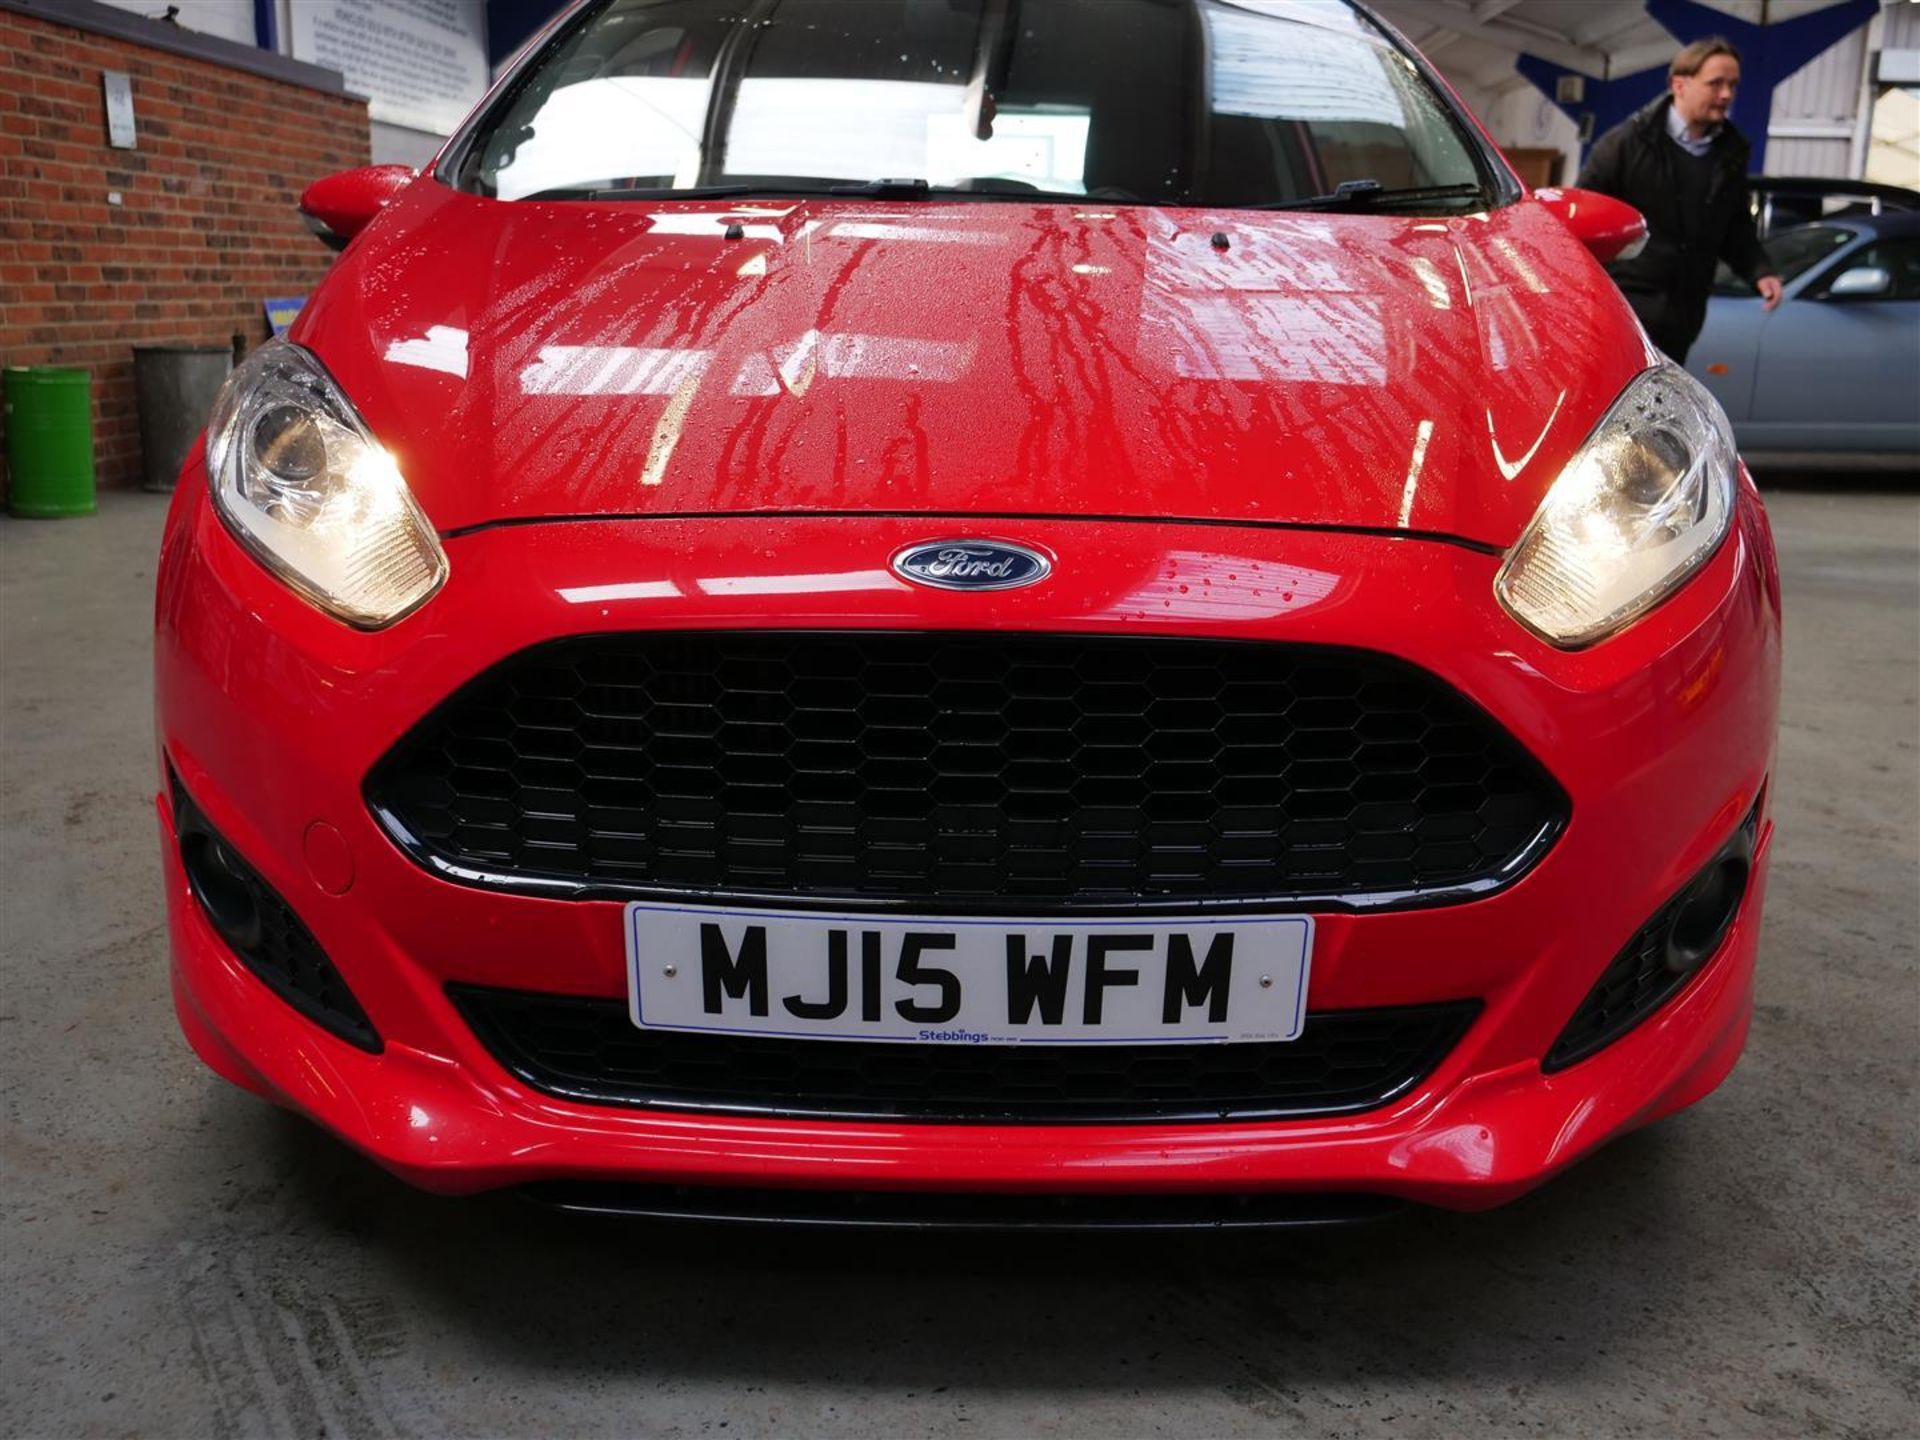 15 15 Ford Fiesta Sport TDCI - Image 2 of 28